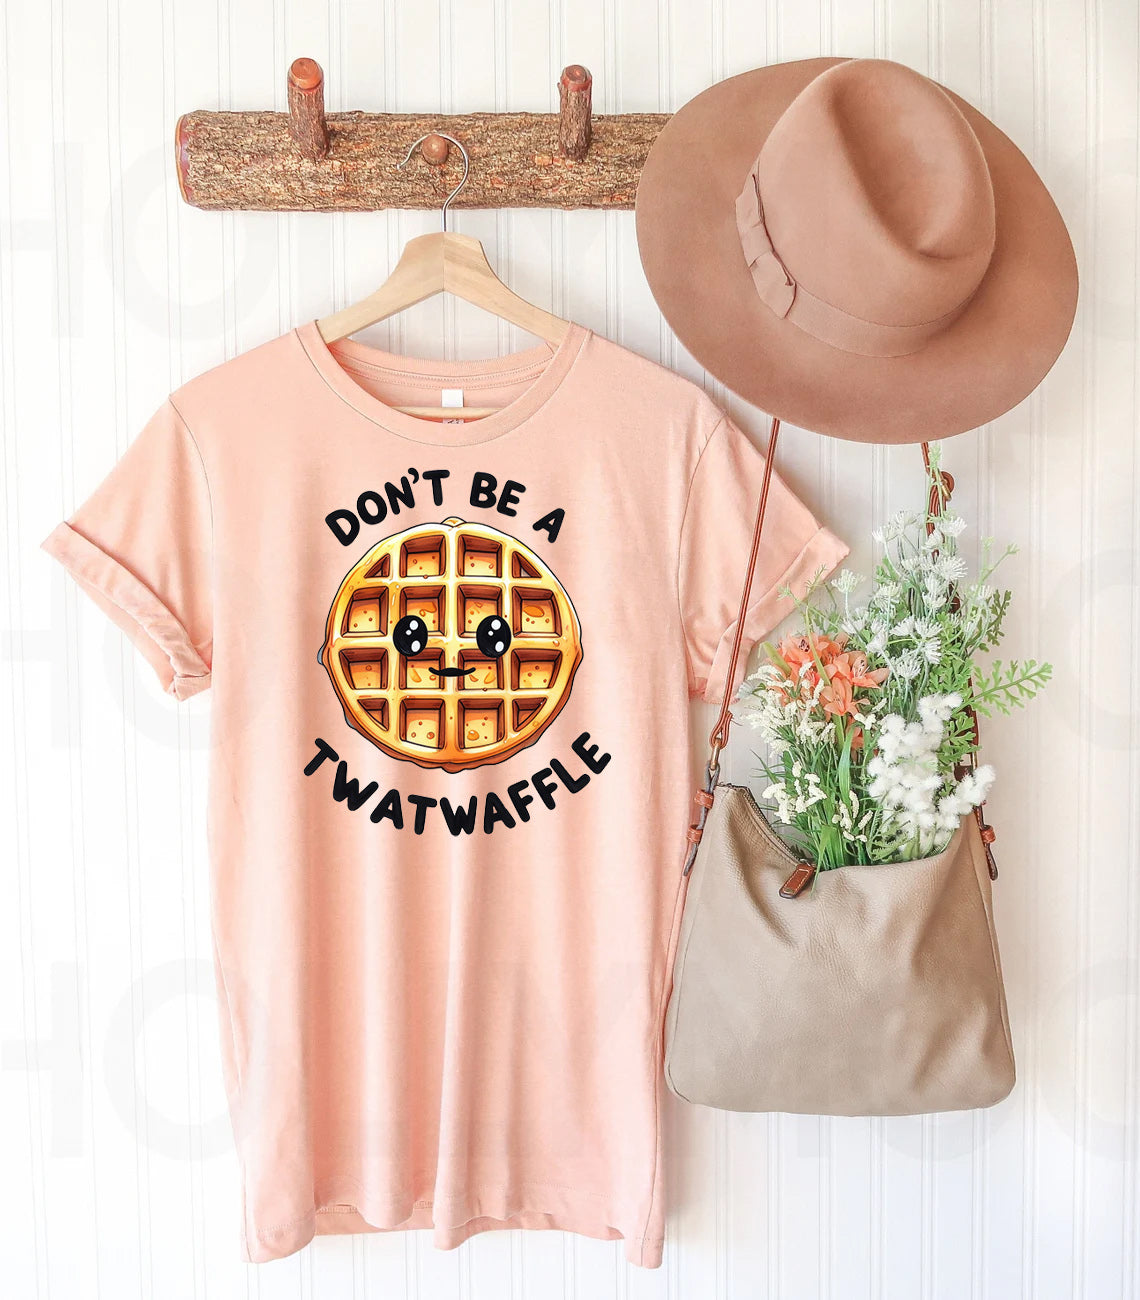 Don't Be a Twatwaffle - Graphic Tee